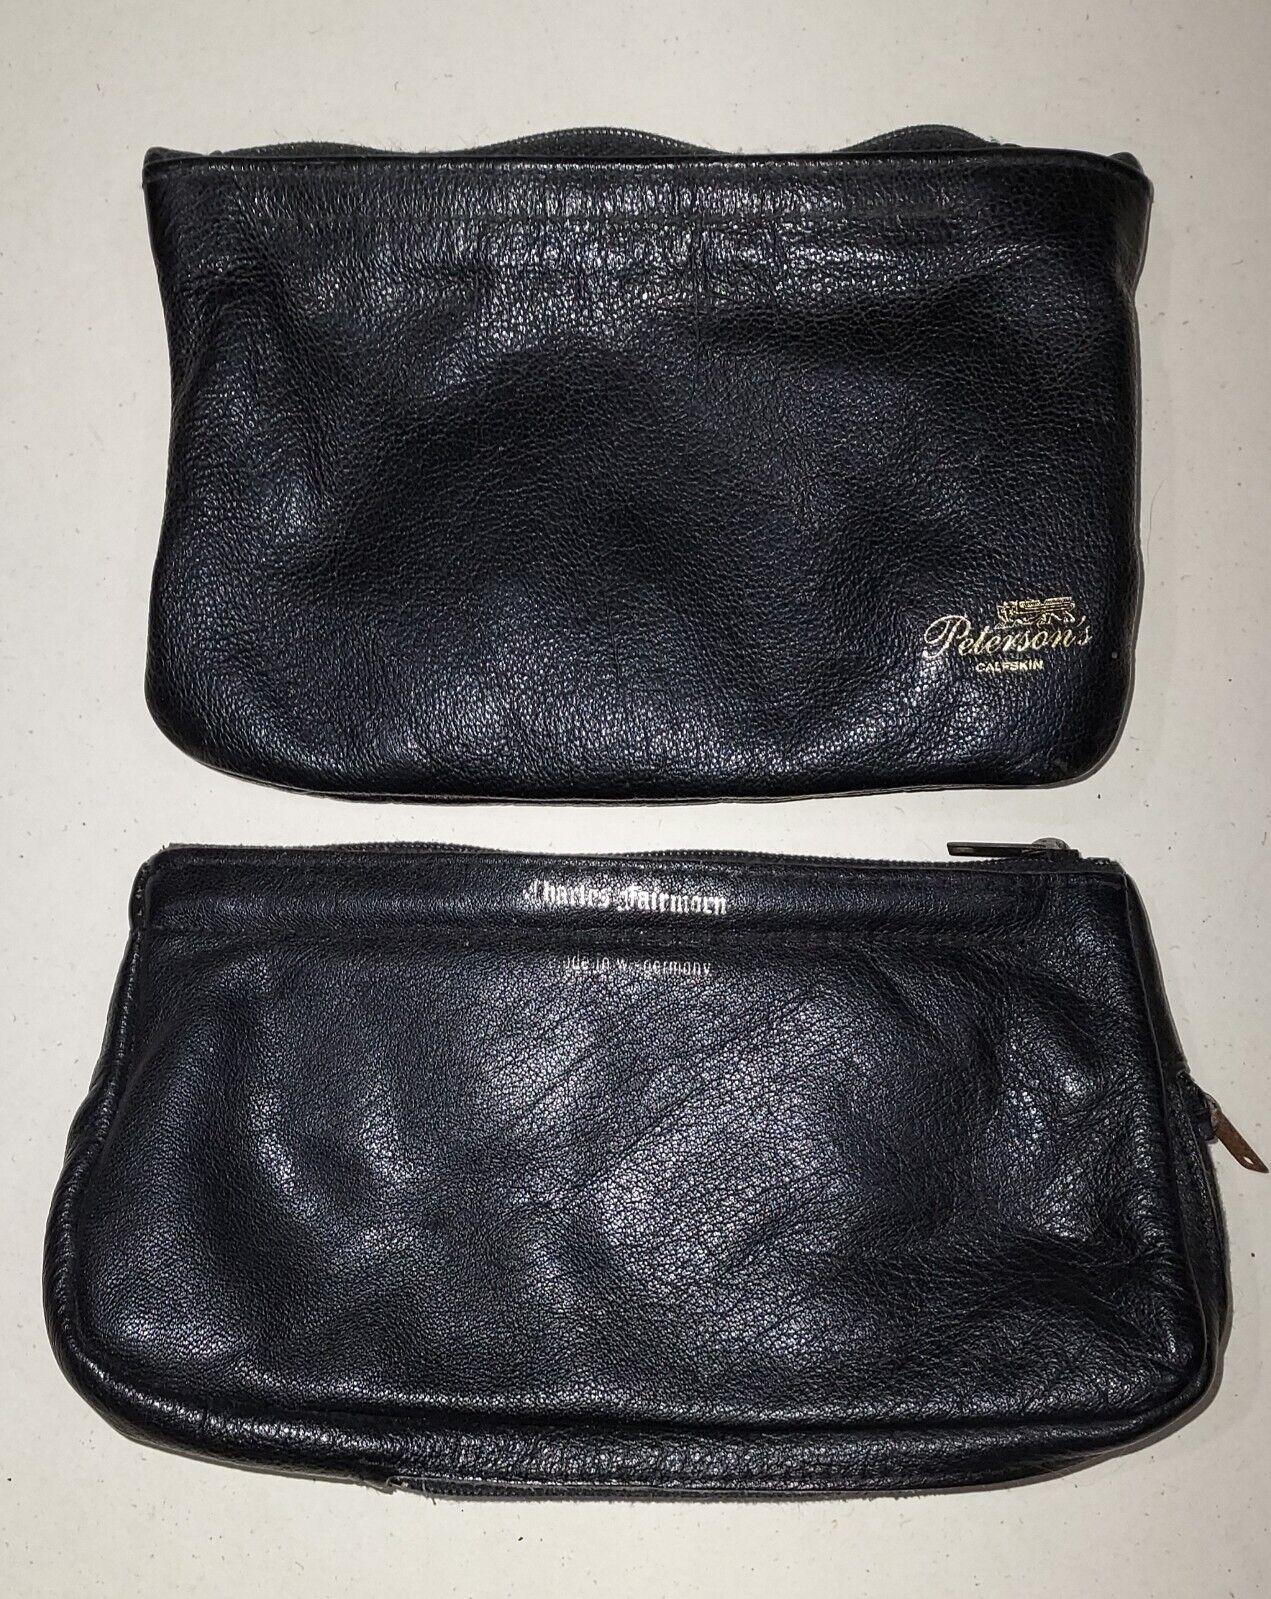 Vintage Pipe Tobacco Pouches Leather Zipper Close Peterson's Charles Fairmorn